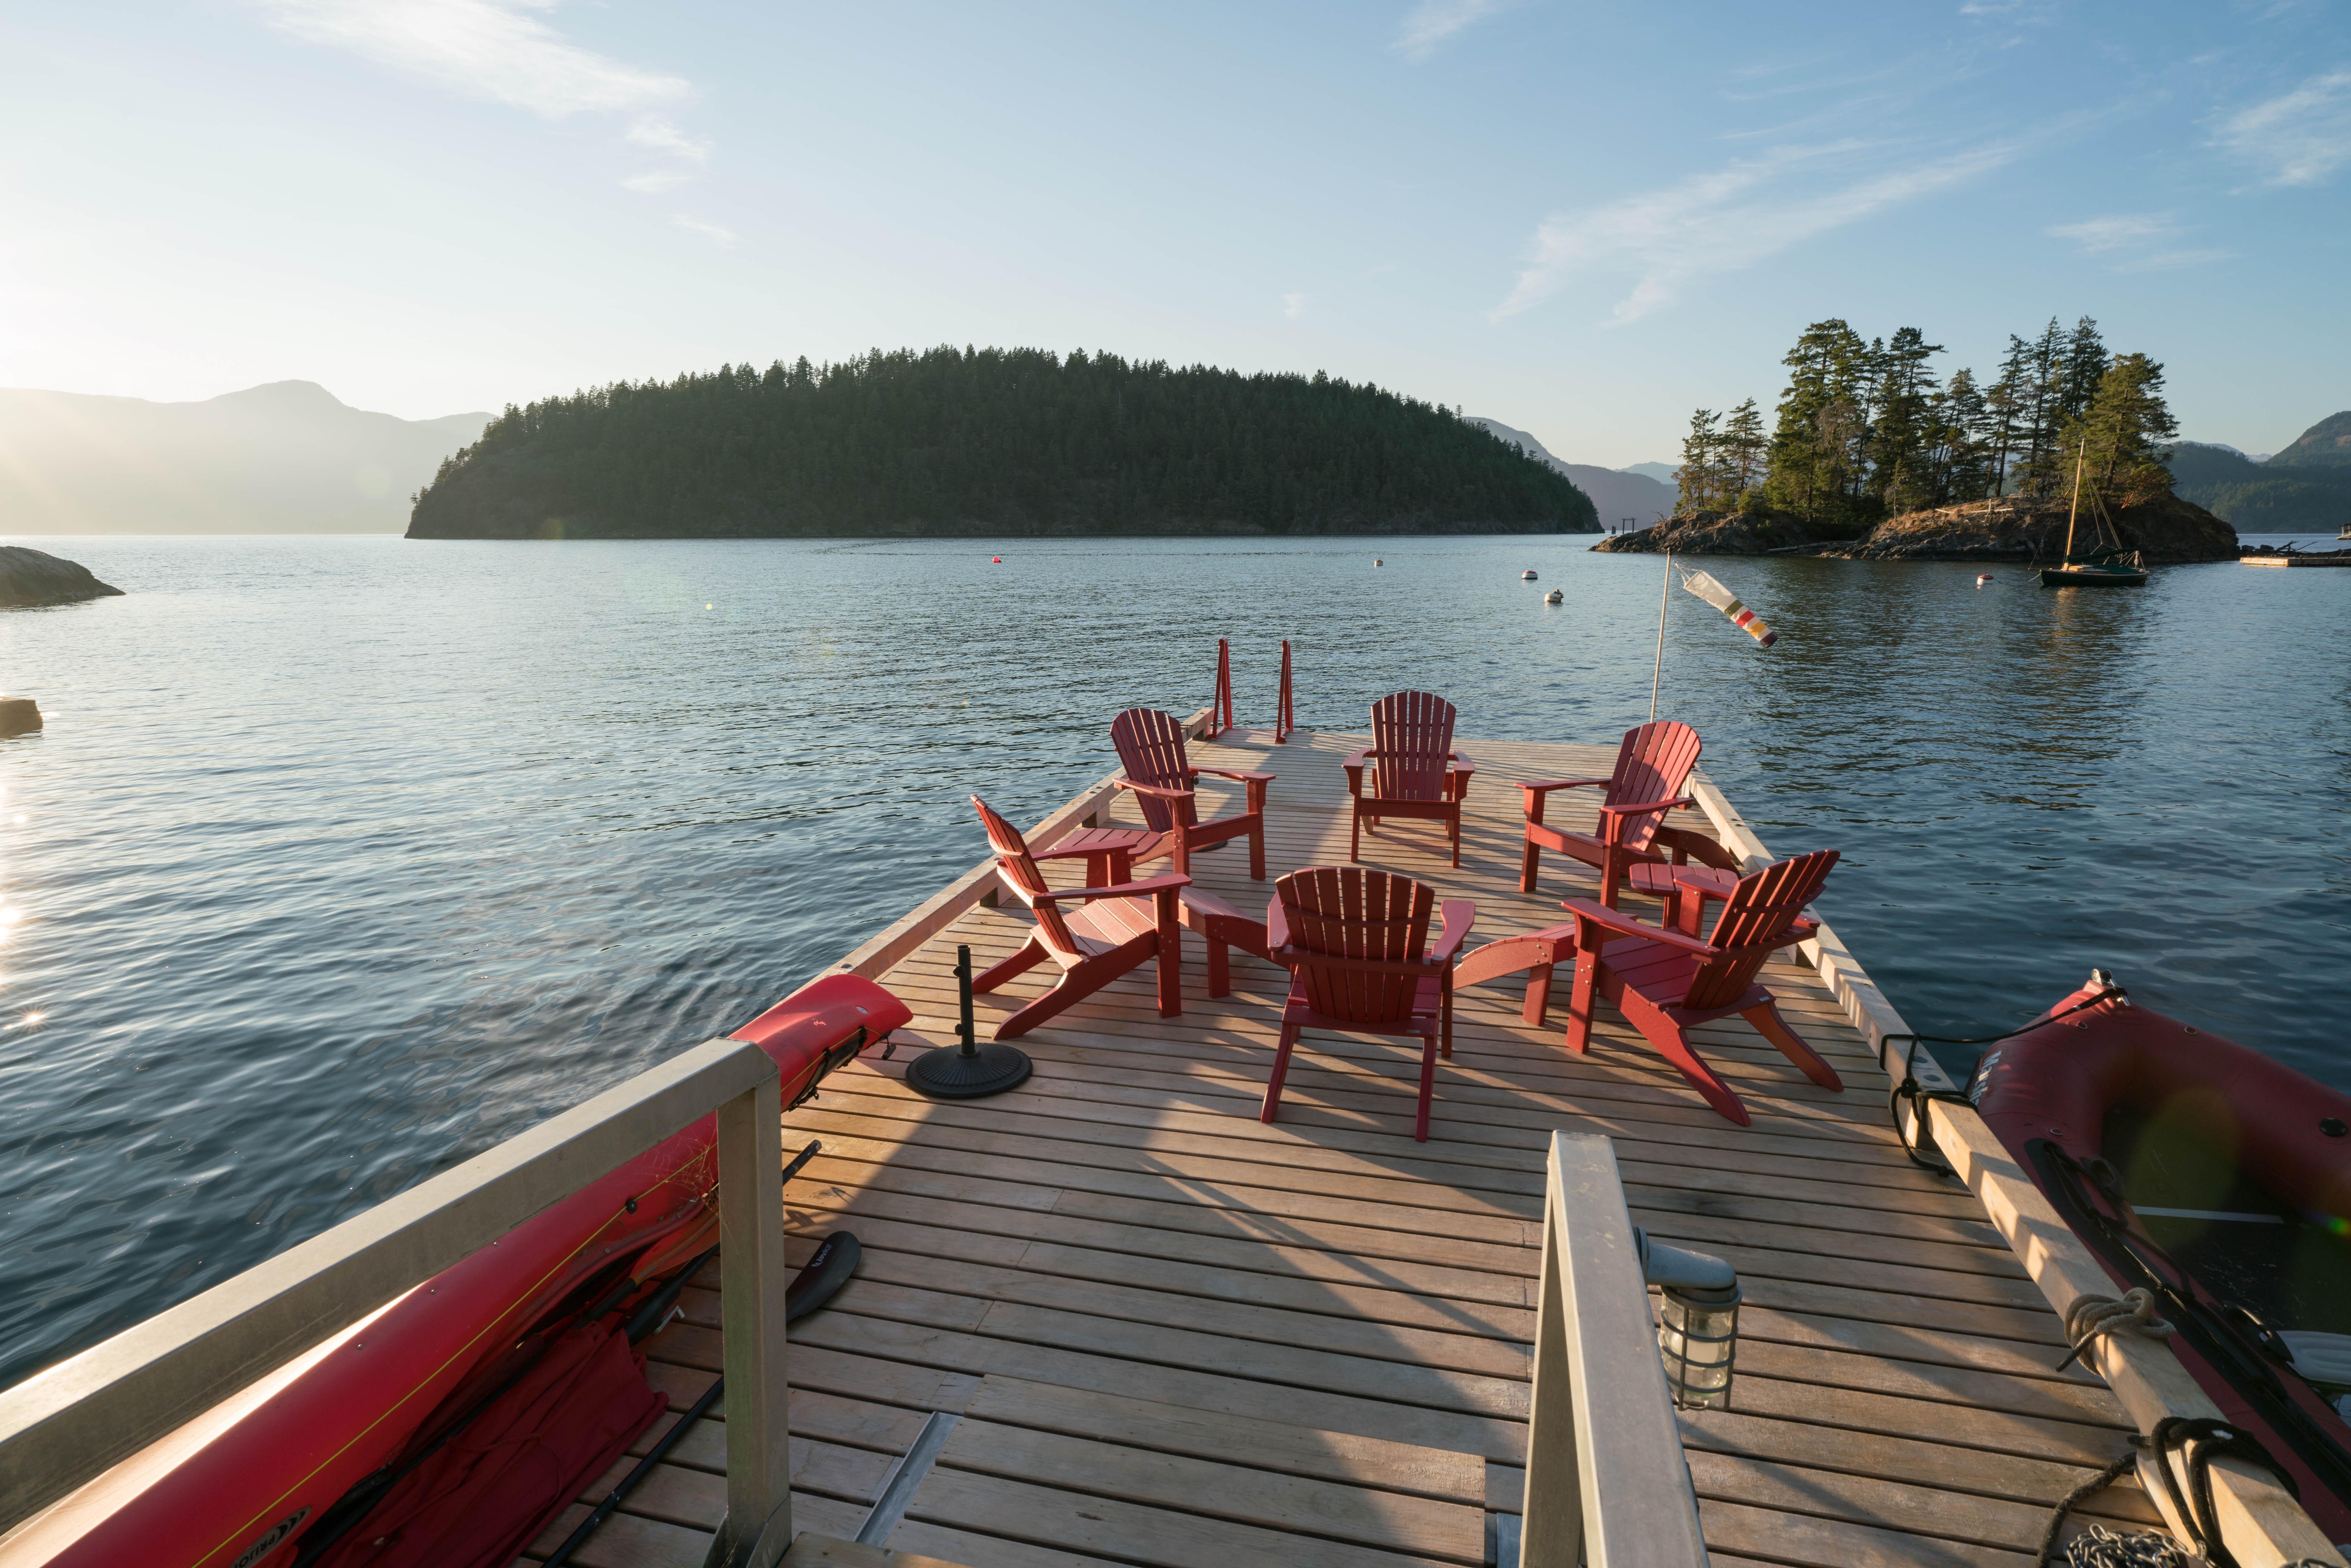 Extensive dock area with red chairs at a custom home on Bowen Island.